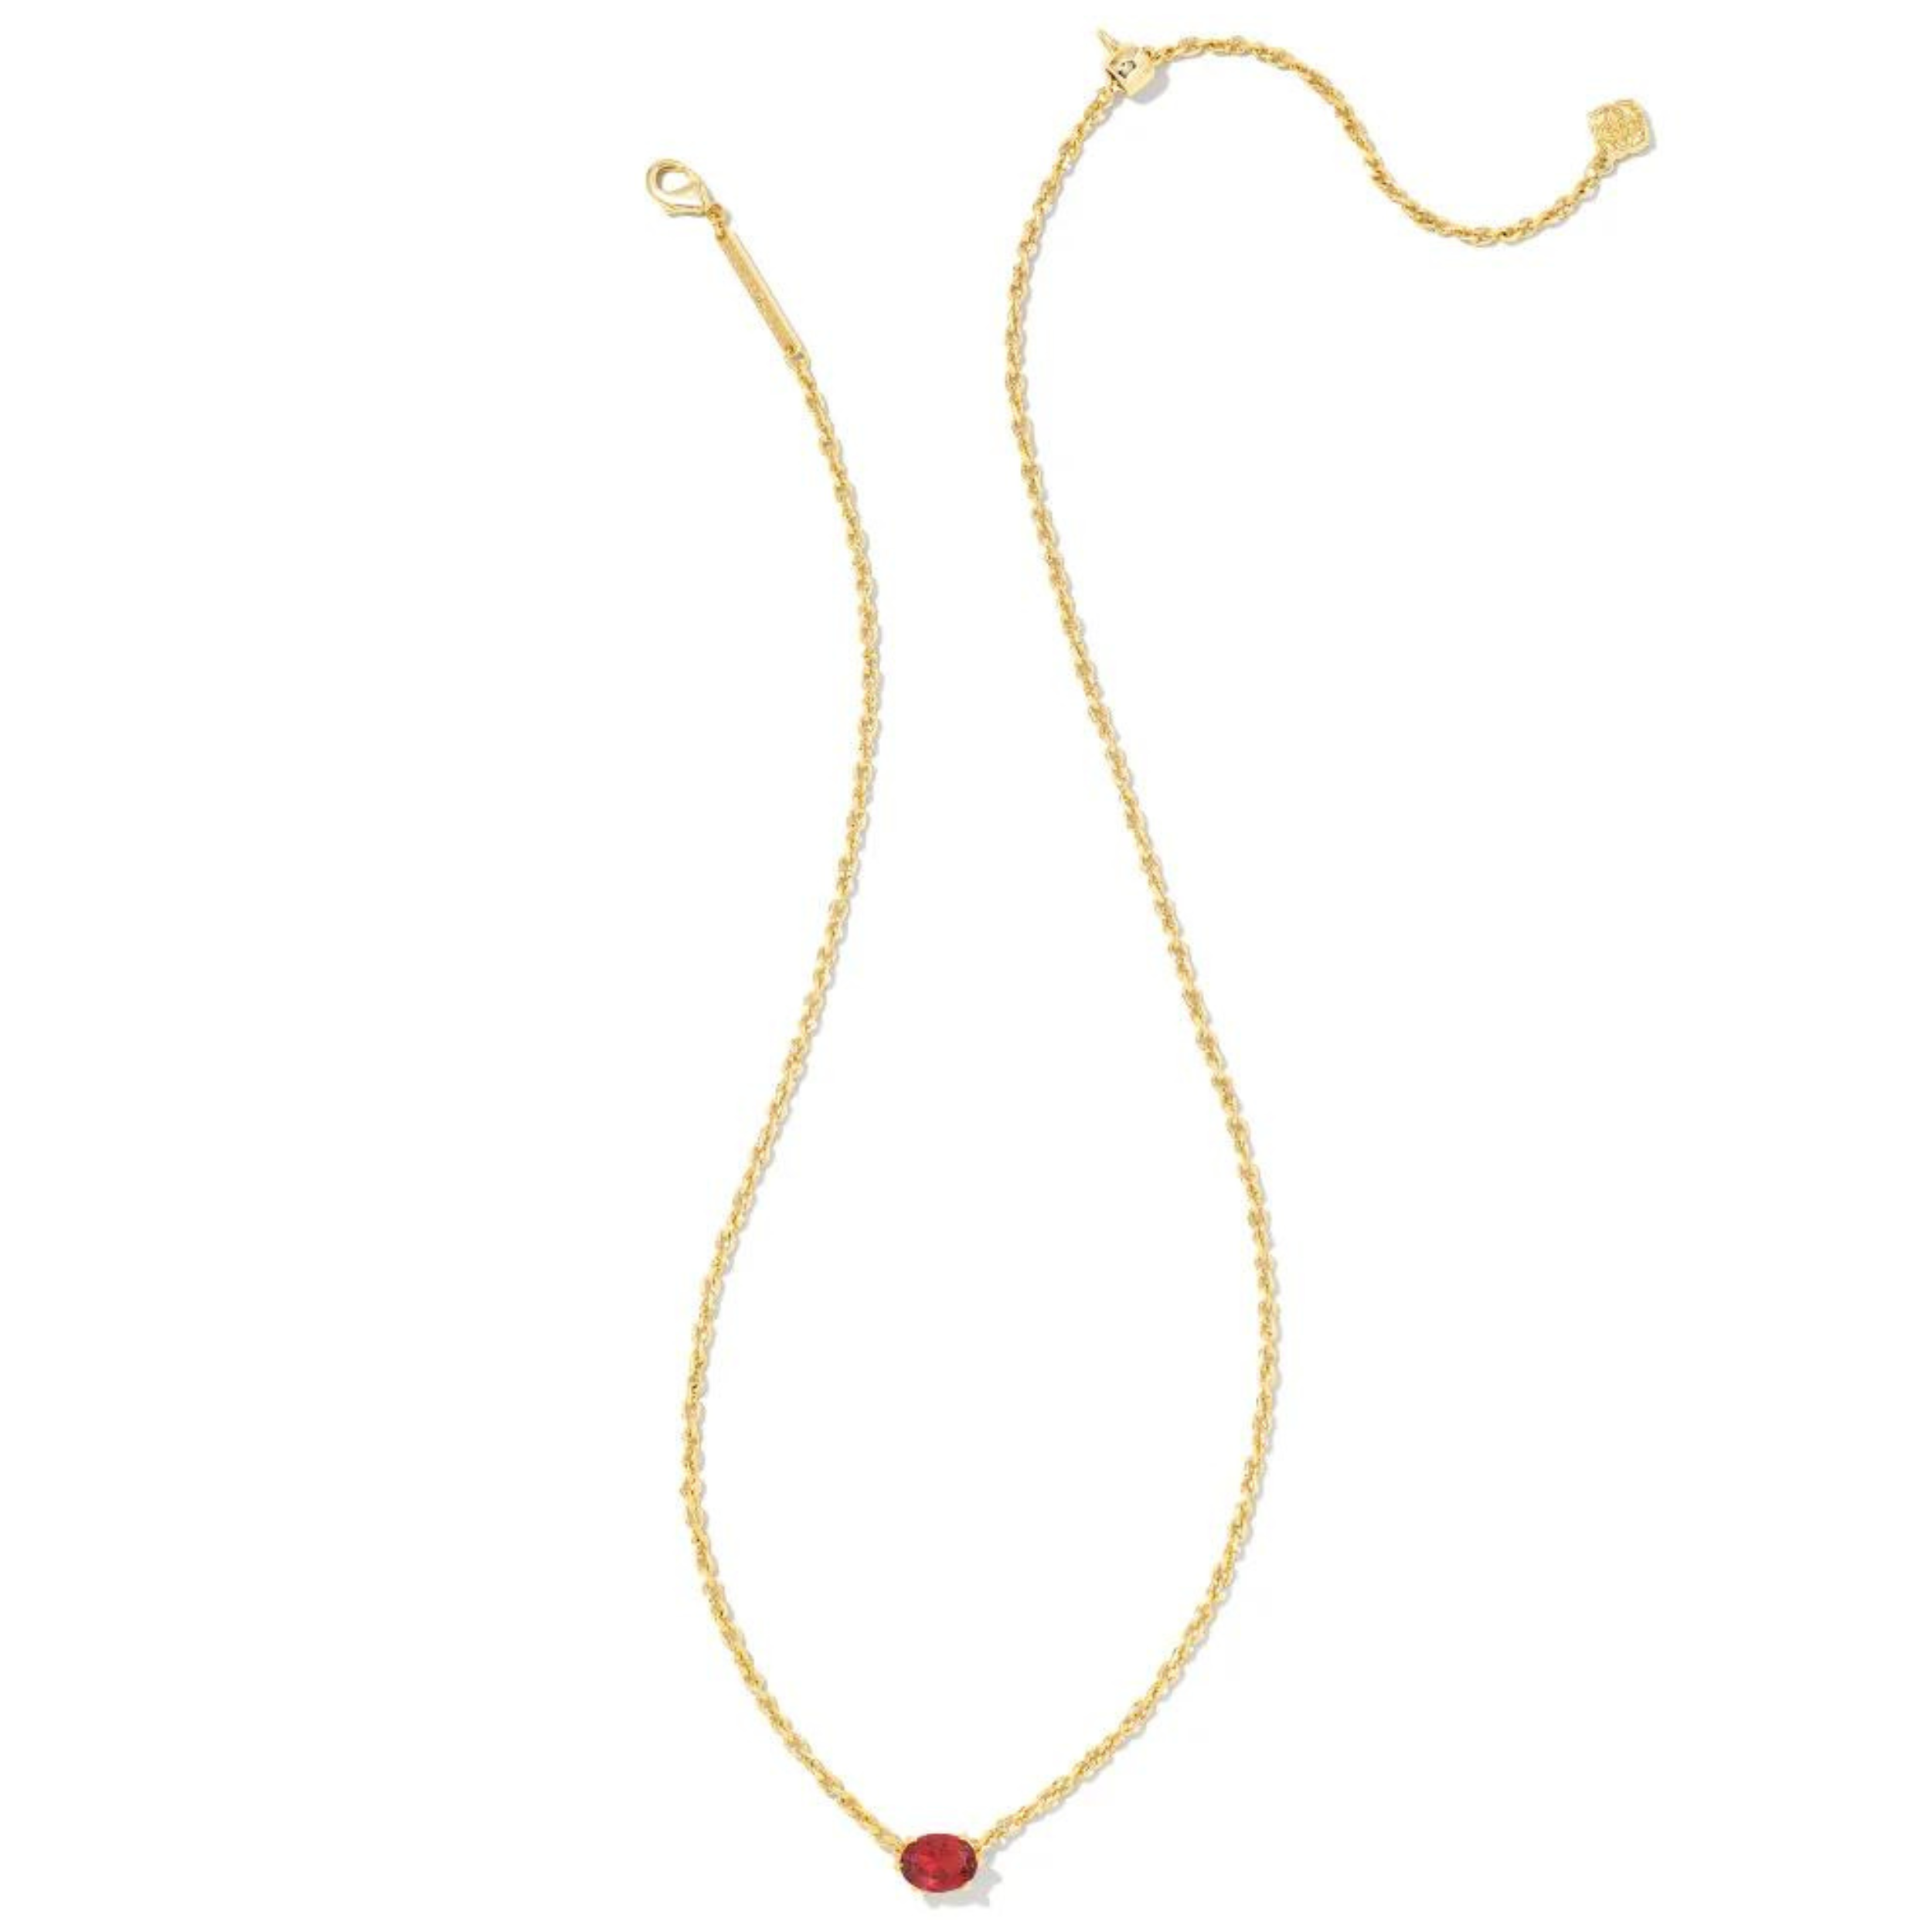 Kendra Scott | Cailin Gold Pendant Necklace in Burgundy Crystal - Giddy Up Glamour Boutique